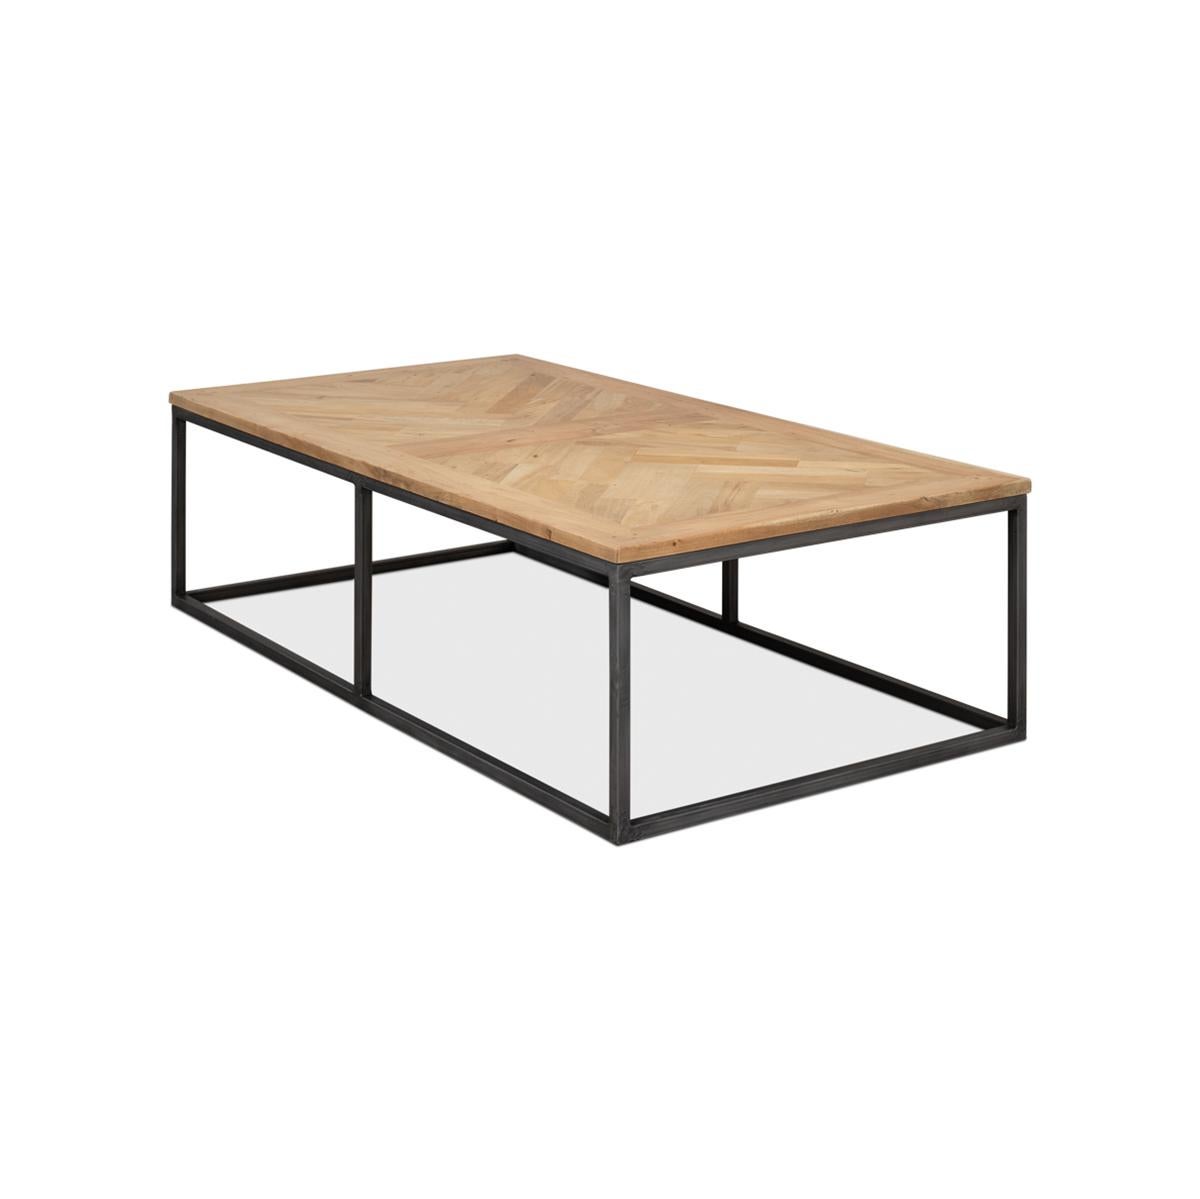 Asian Parquet Industrial Coffee Table For Sale